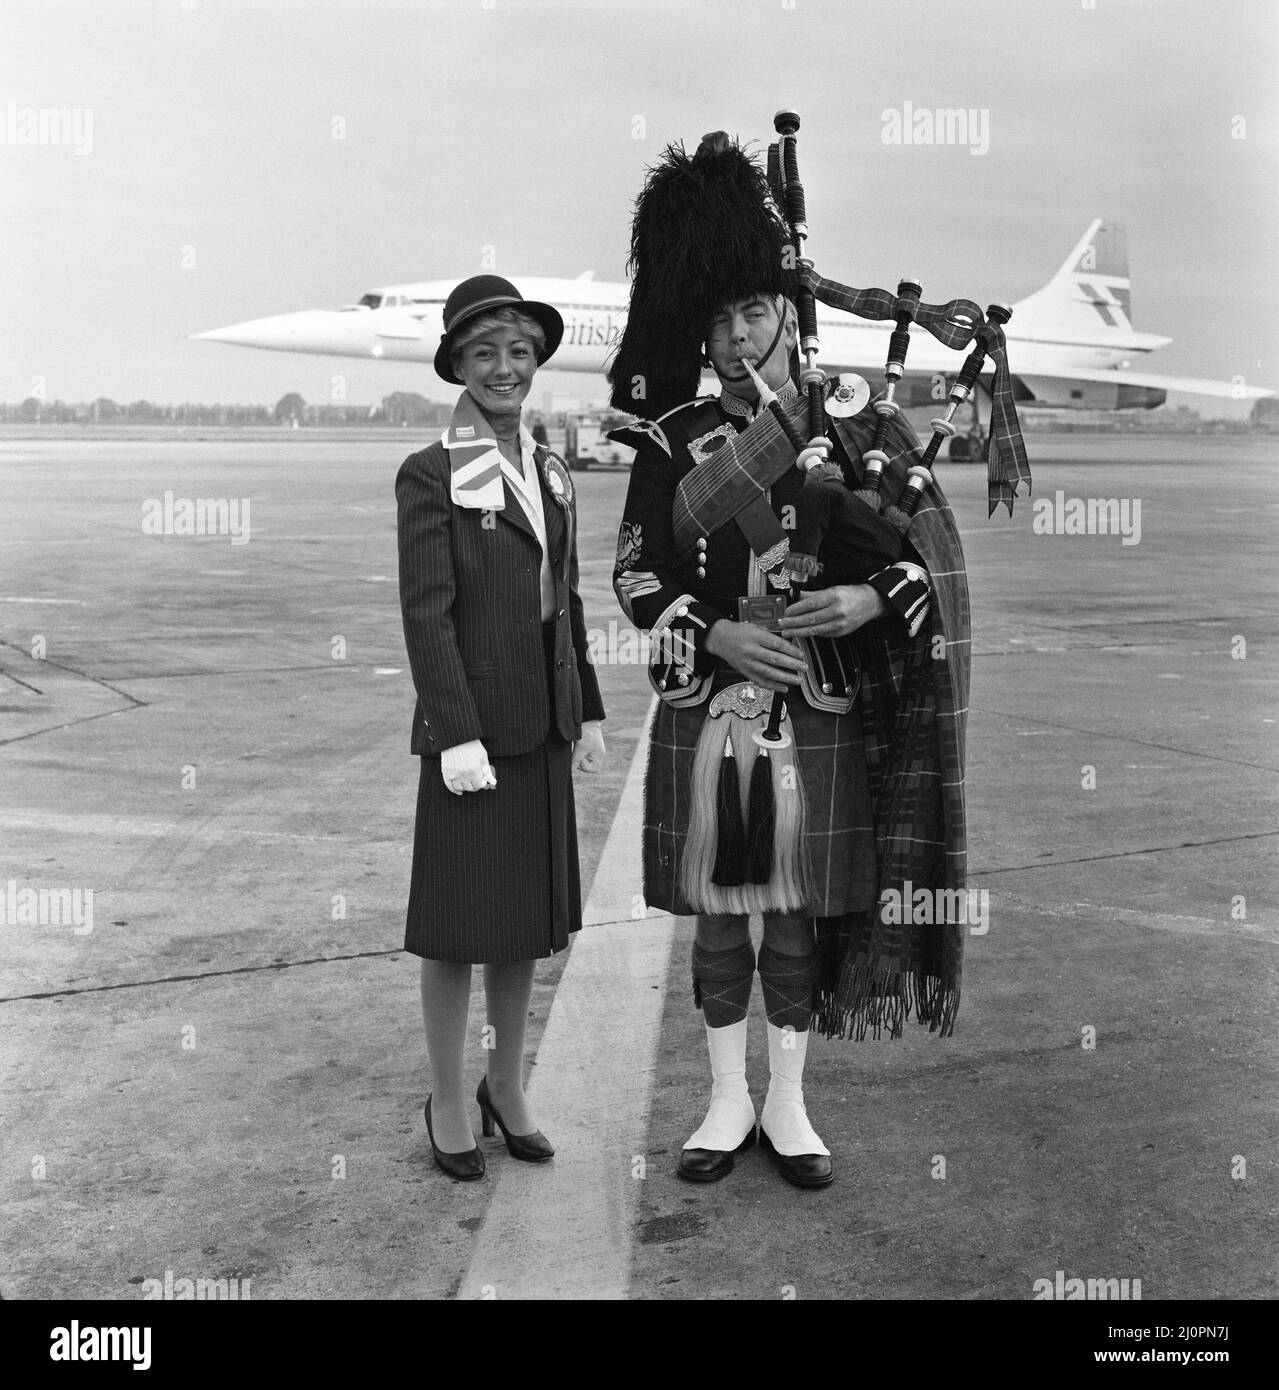 British Airways launches its Super Shuttle Service. Passengers are pictured flying from LAP to Glasgow on Concorde. BA's Jodie Baynon is pictured. 30th August 1983. Stock Photo